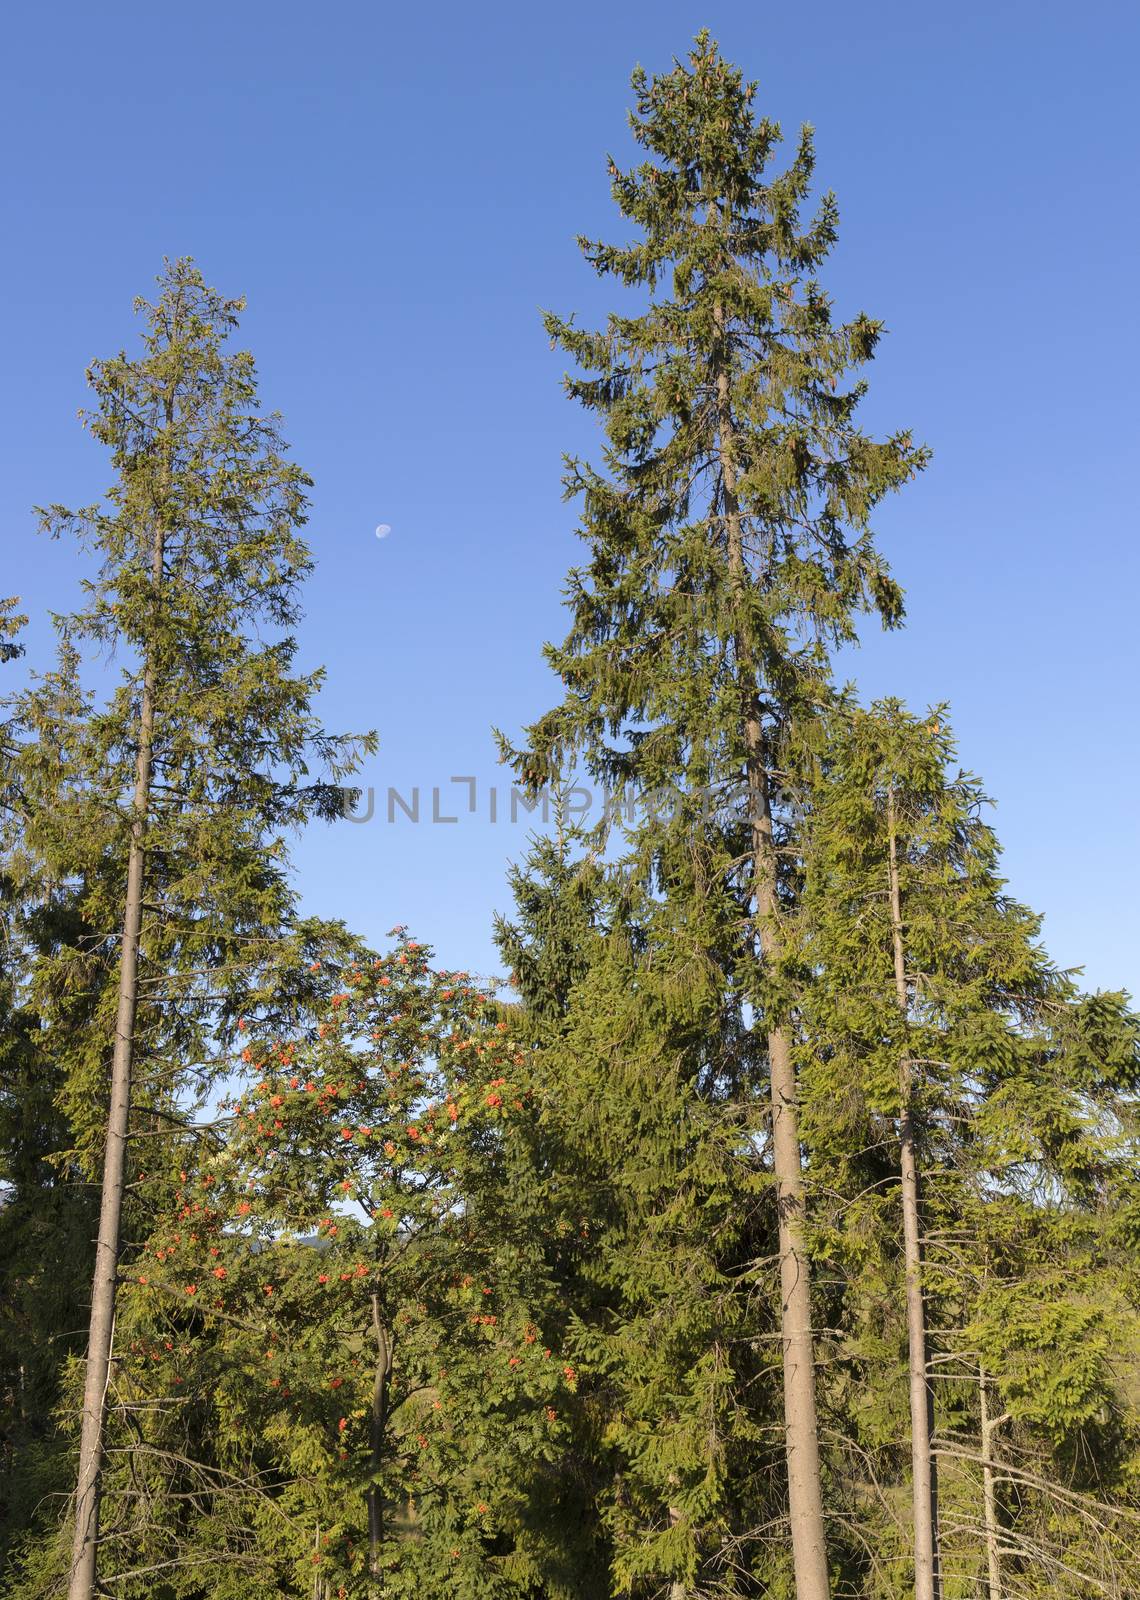 On a blue sky in a bright sunny day, the moon is visible between two tall fir trees above the mountain ash